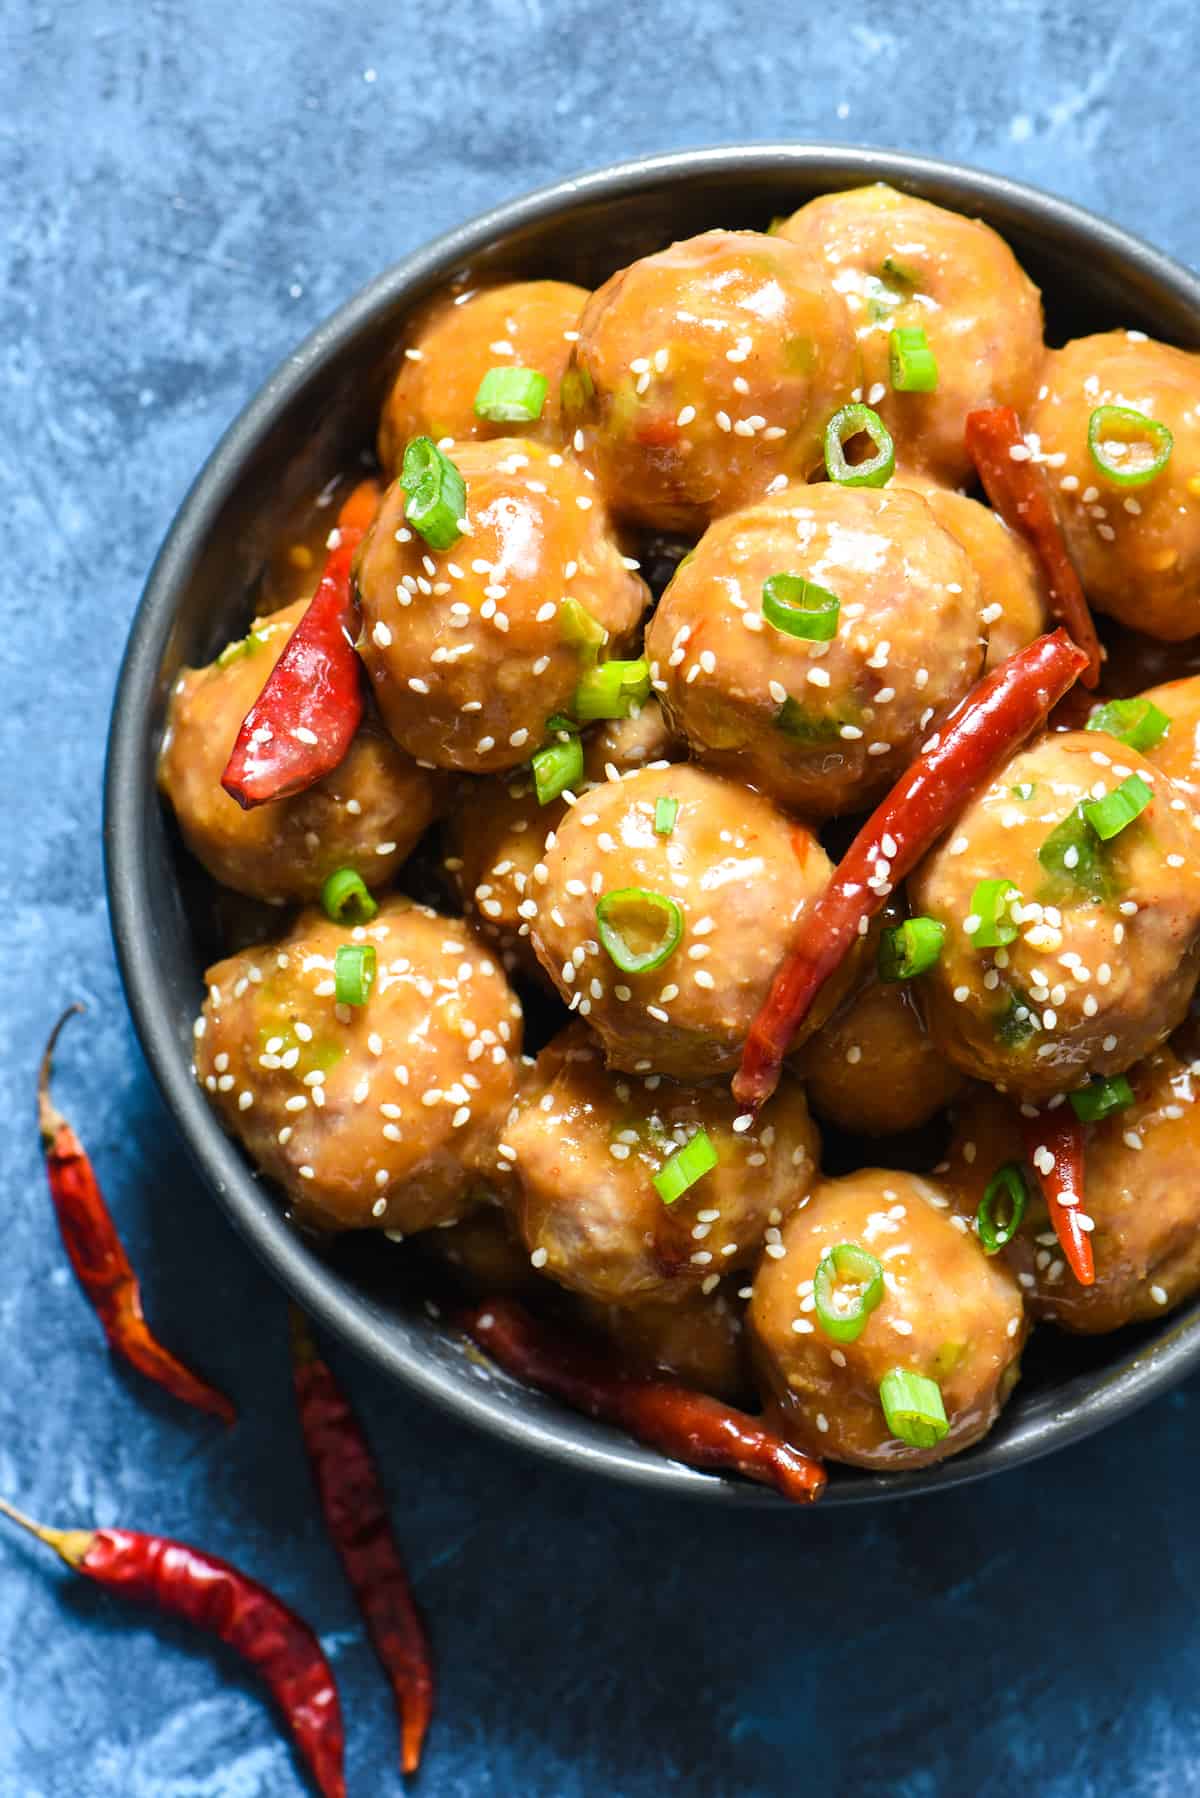 Round bowl of General Tso's meatballs topped with green onions, sesame seeds and dried chiles on a blue background.